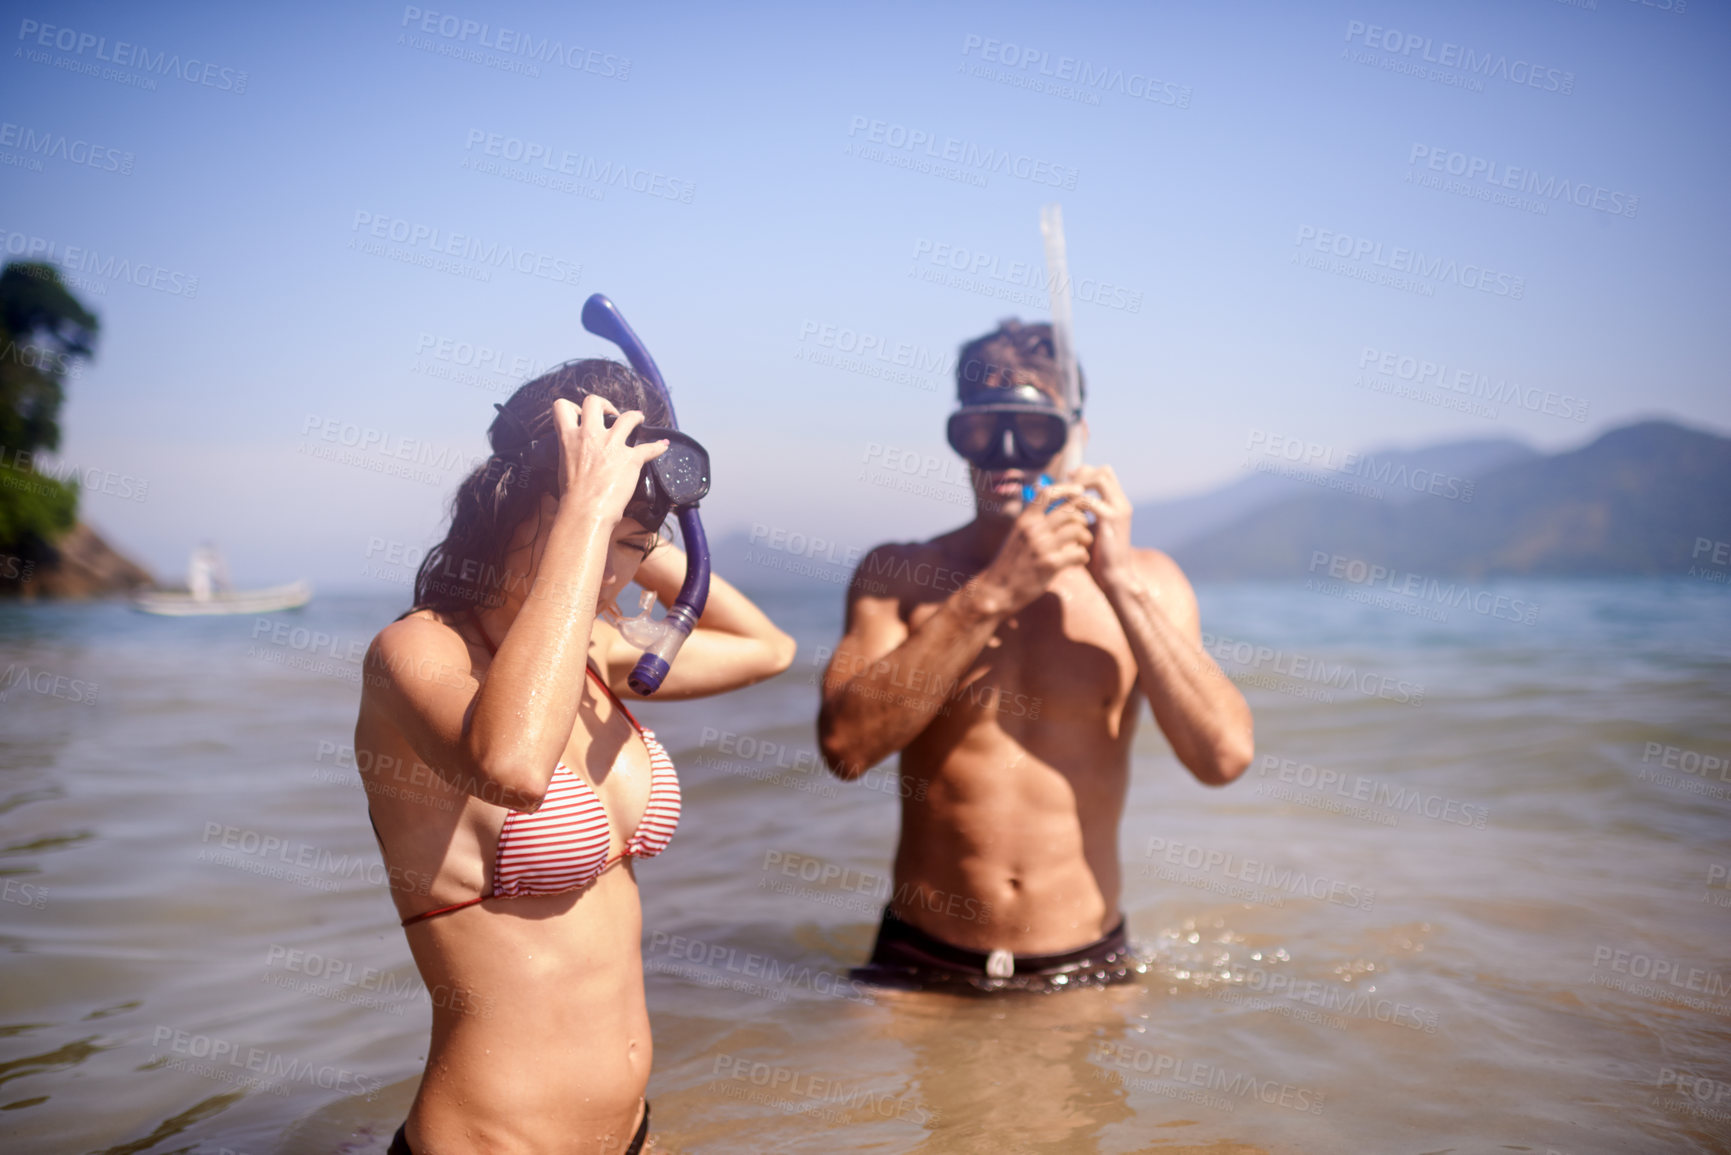 Buy stock photo Scuba diving, water or couple swimming to explore for marine adventure, hobby or vacation activity. Mask, divers or people at sea, beach or ocean for travel, tropical environment or outdoor holiday